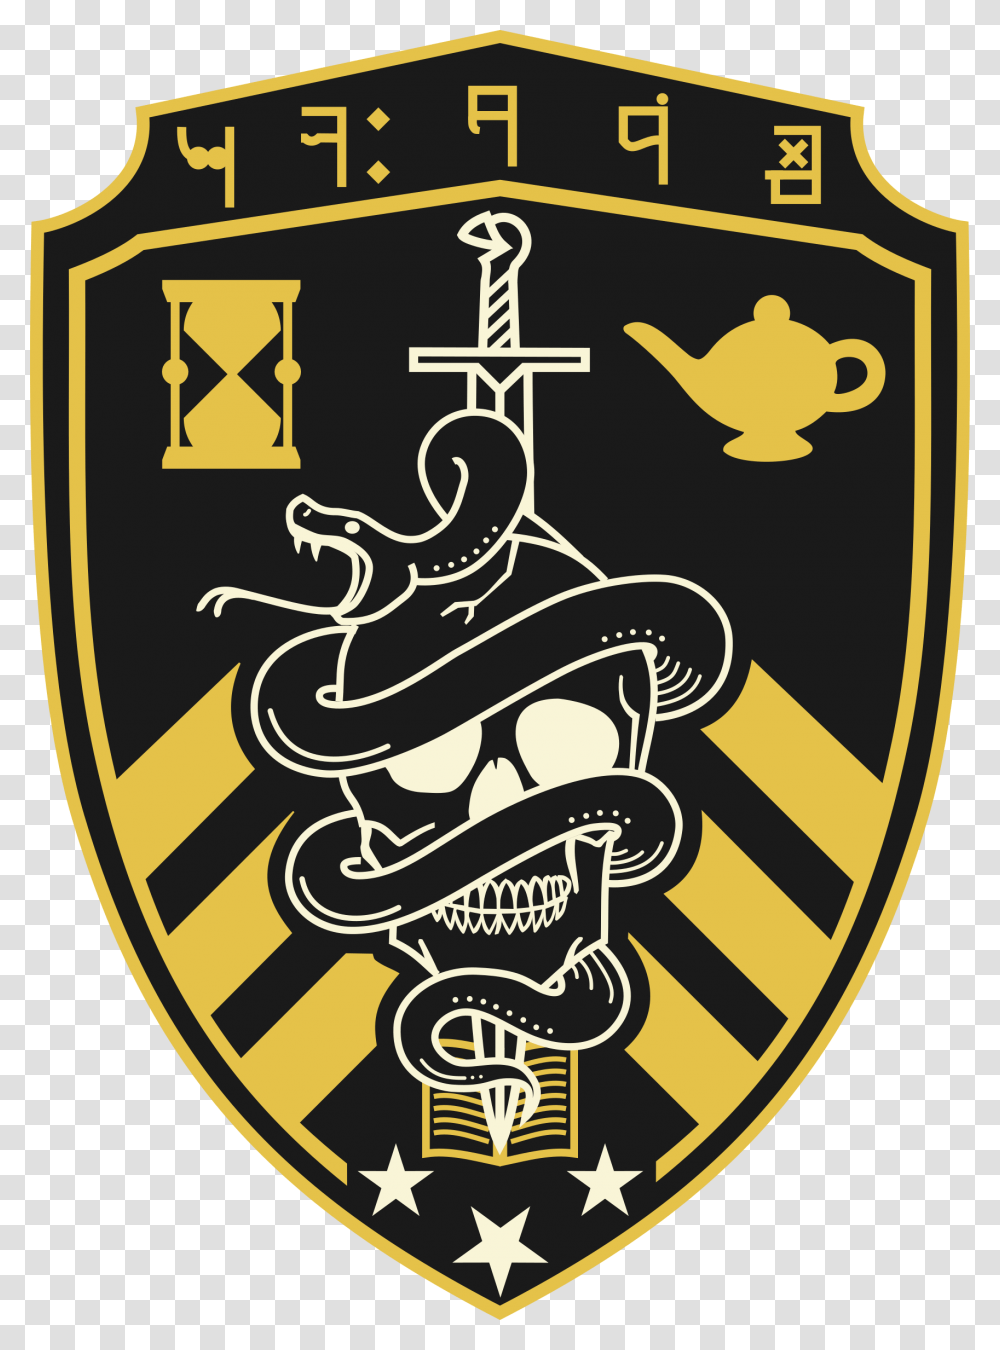 Seal And Serpent Crest 2017 Seal And Serpent, Armor, Shield, Poster, Advertisement Transparent Png